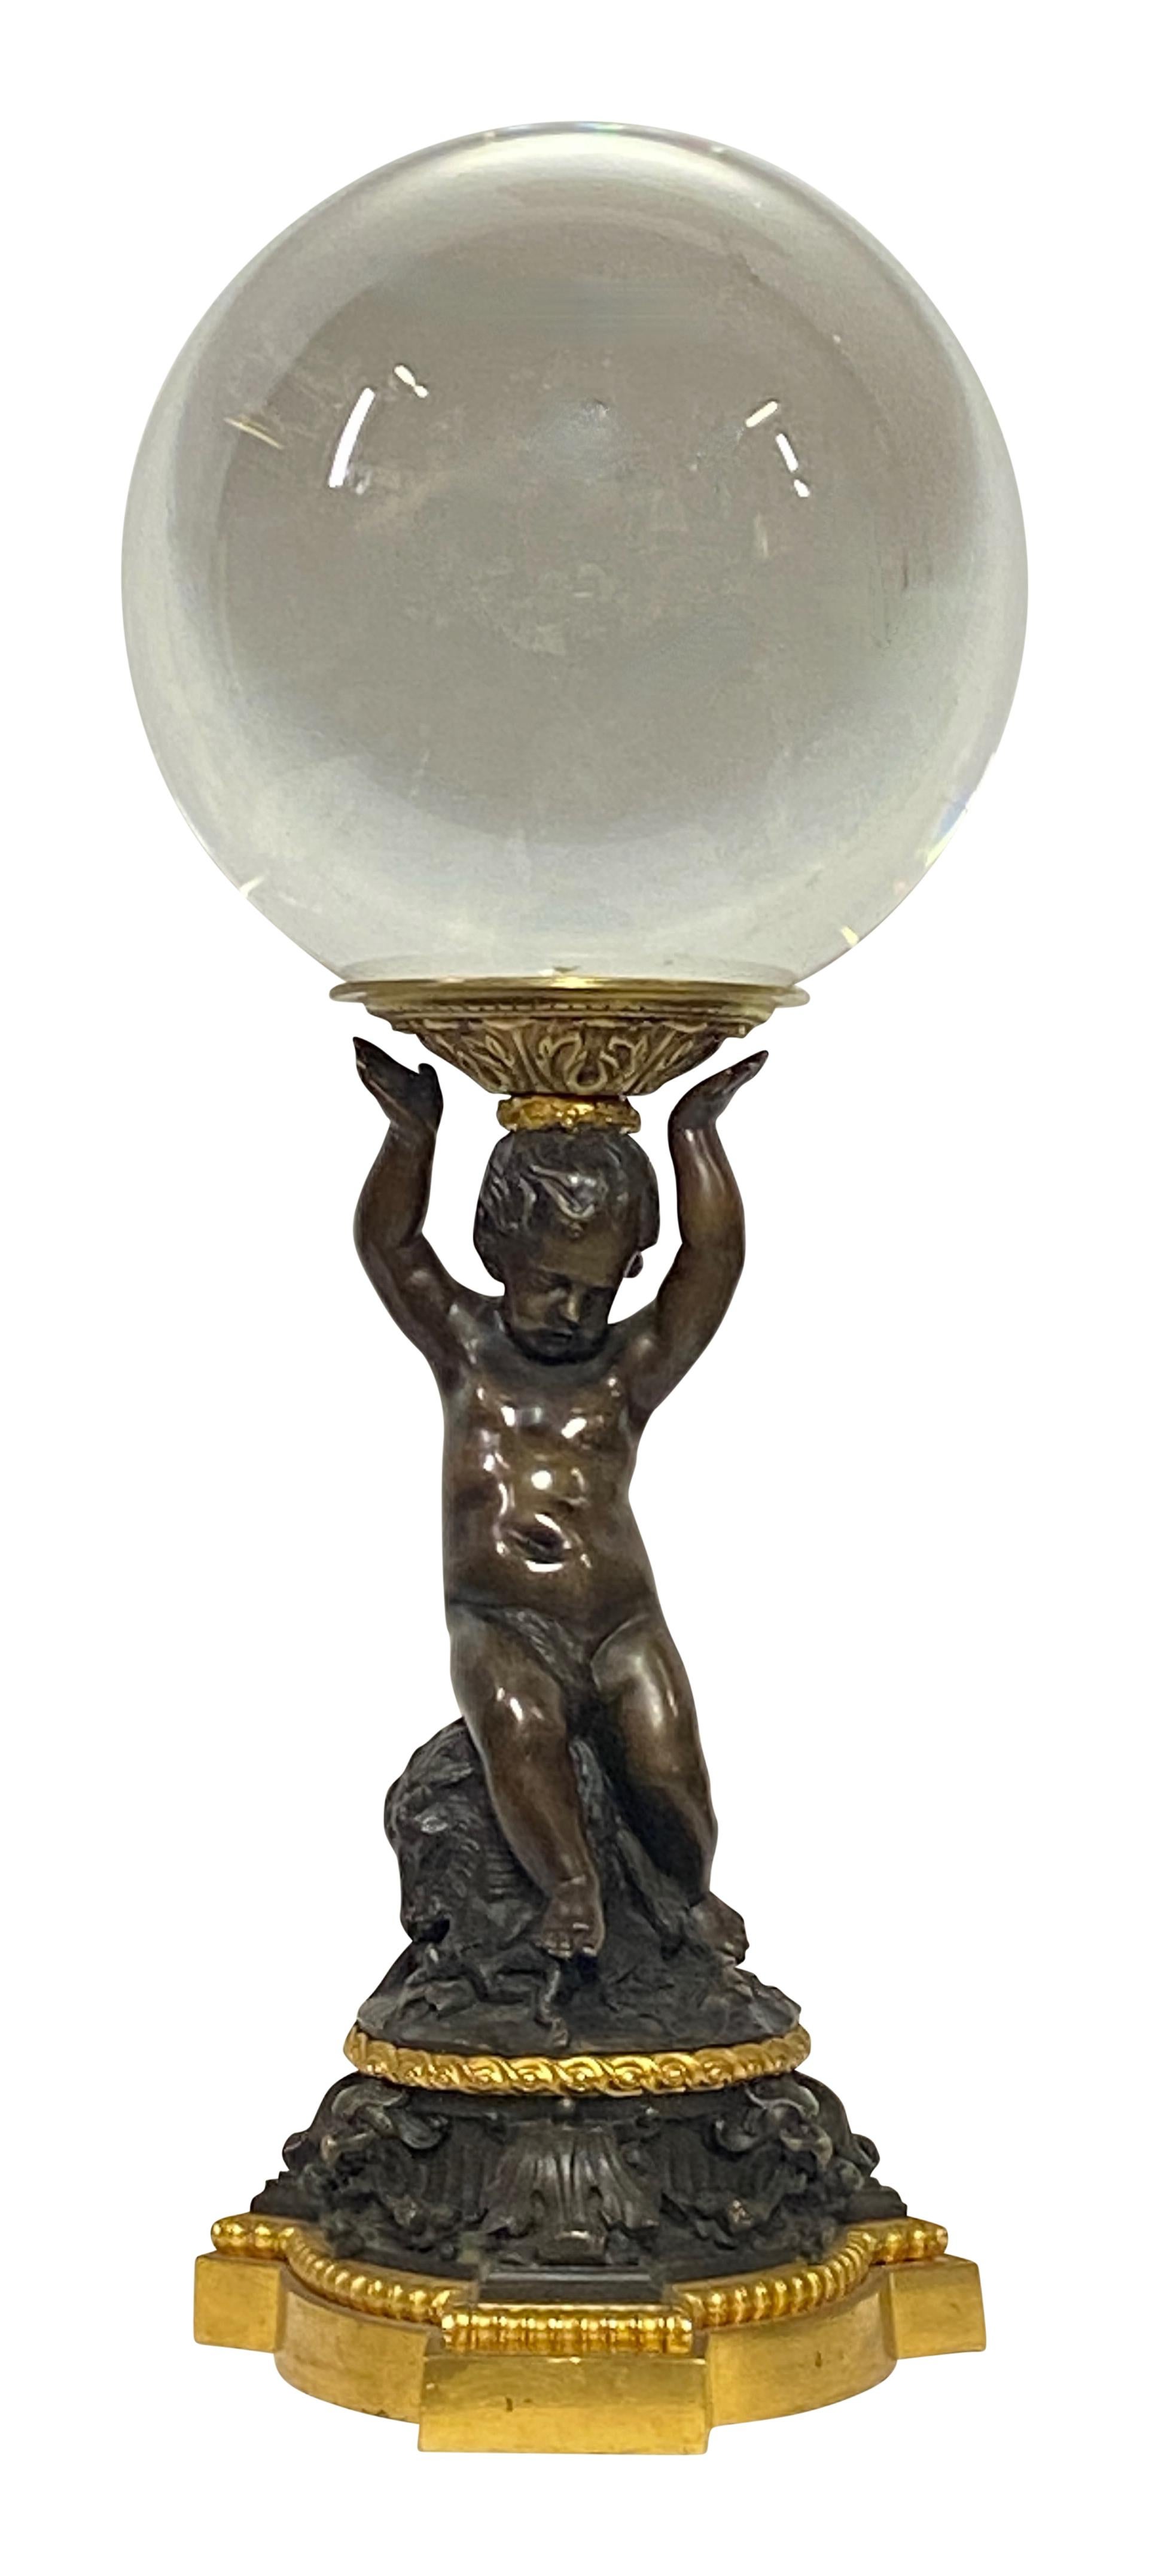 An exceptional Renaissance style patinated and gilt bronze cherub base made in the early to mid 19th century. The figure holding a 10 inch diameter crystal ball.  
Beautiful quality and detail.